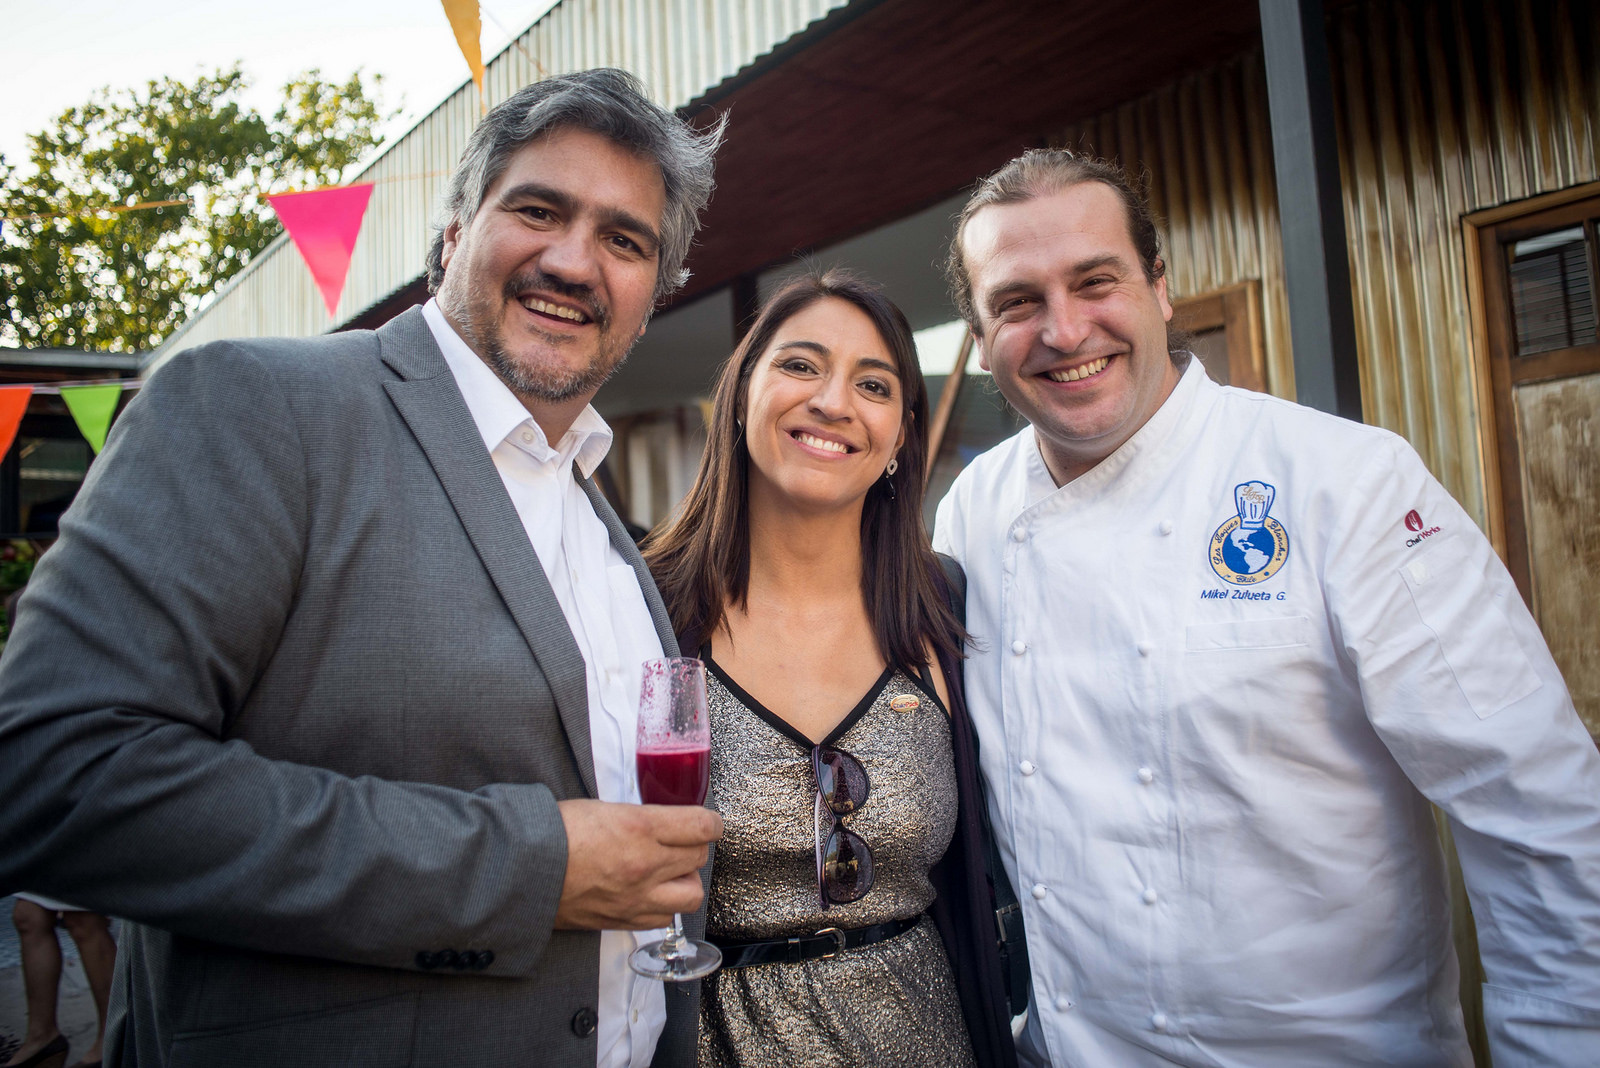 (From left to right) Alejandro Buvinic, Director of ProChile; Natalia Sepulveda, Head of the Research and Marketing Department of Asprocer, and Chef Mikel Zulueta.
